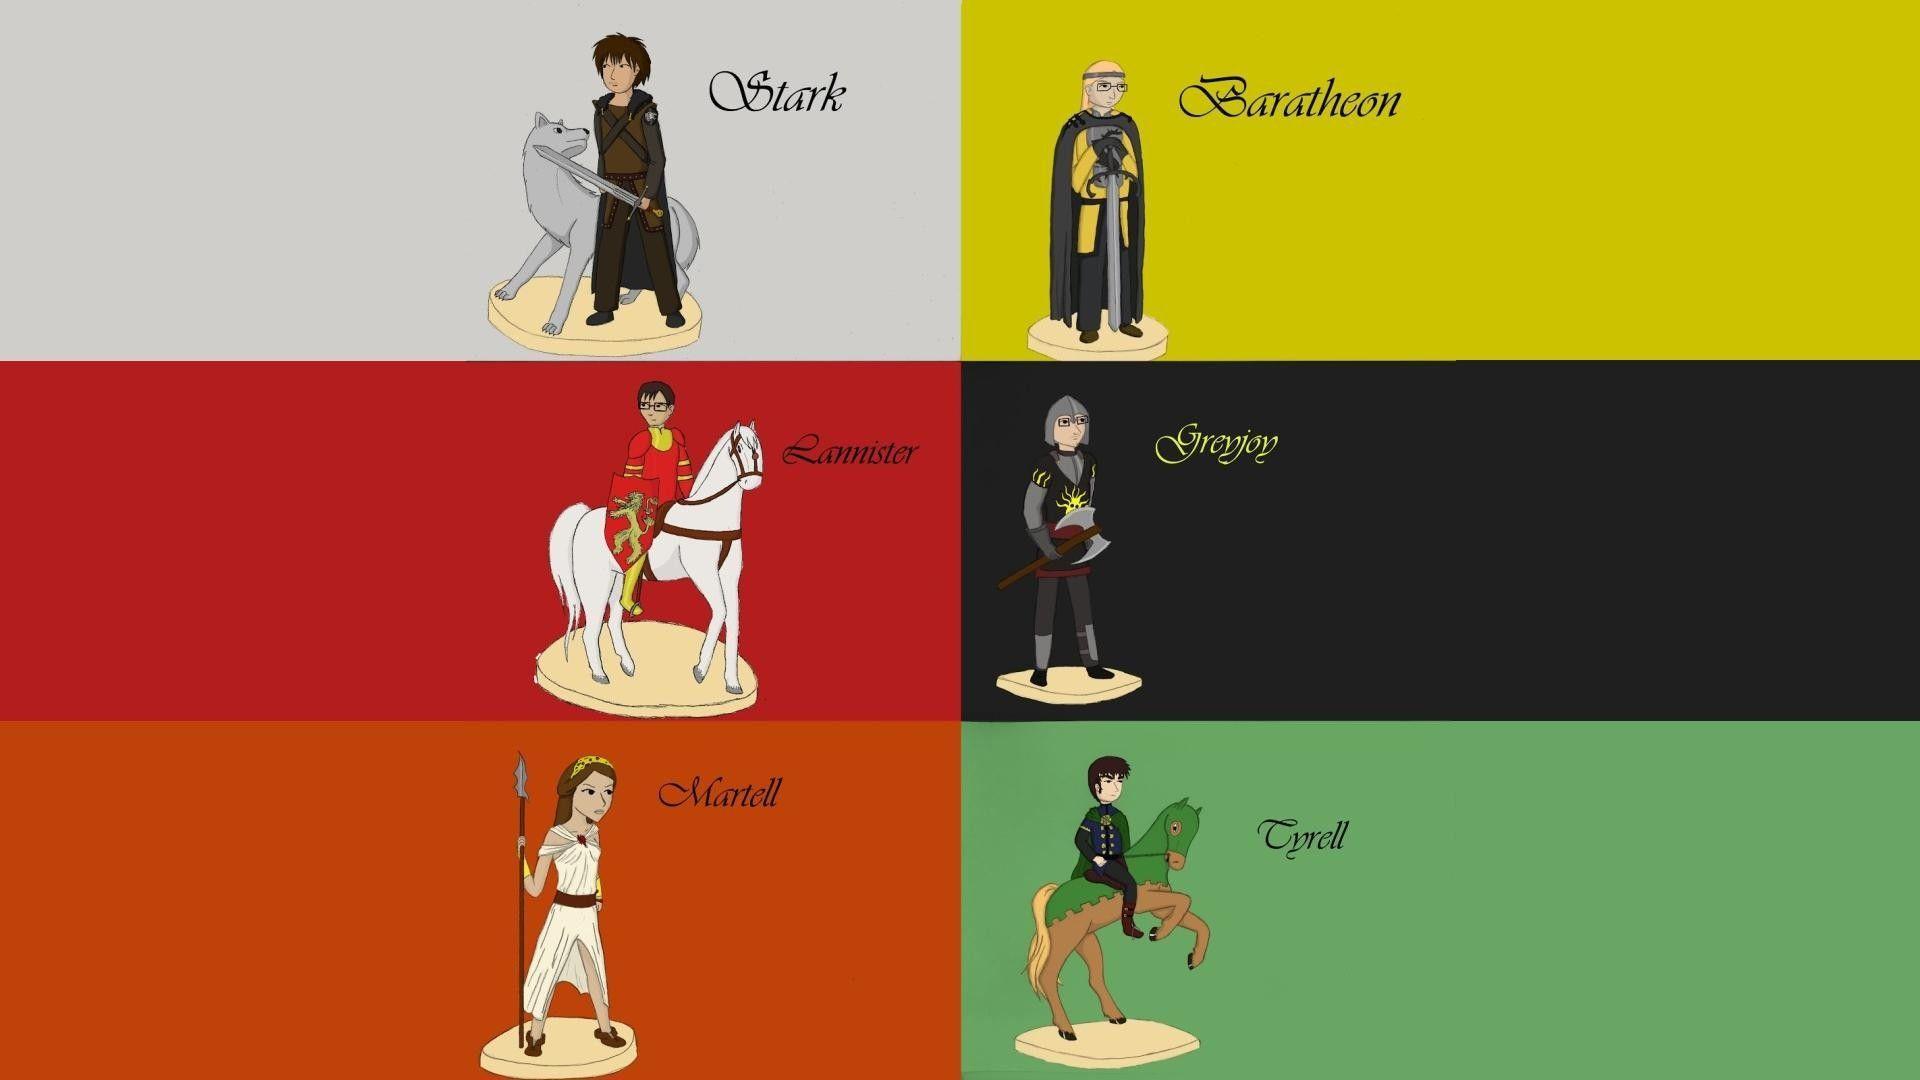 Game of Thrones, webcomic, House Greyjoy, House Lannister, House